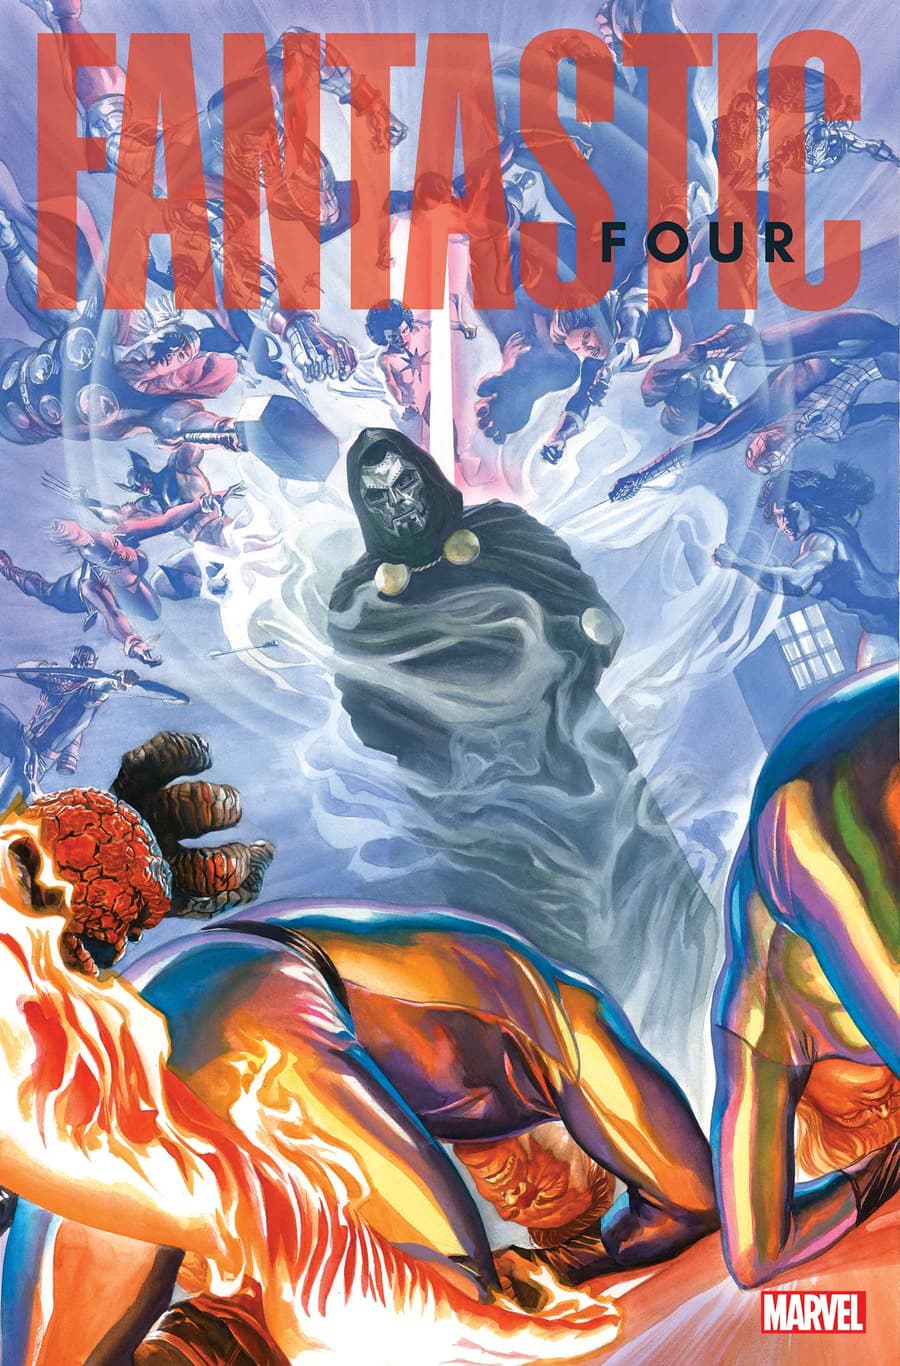 FANTASTIC FOUR #700 cover by Alex Ross